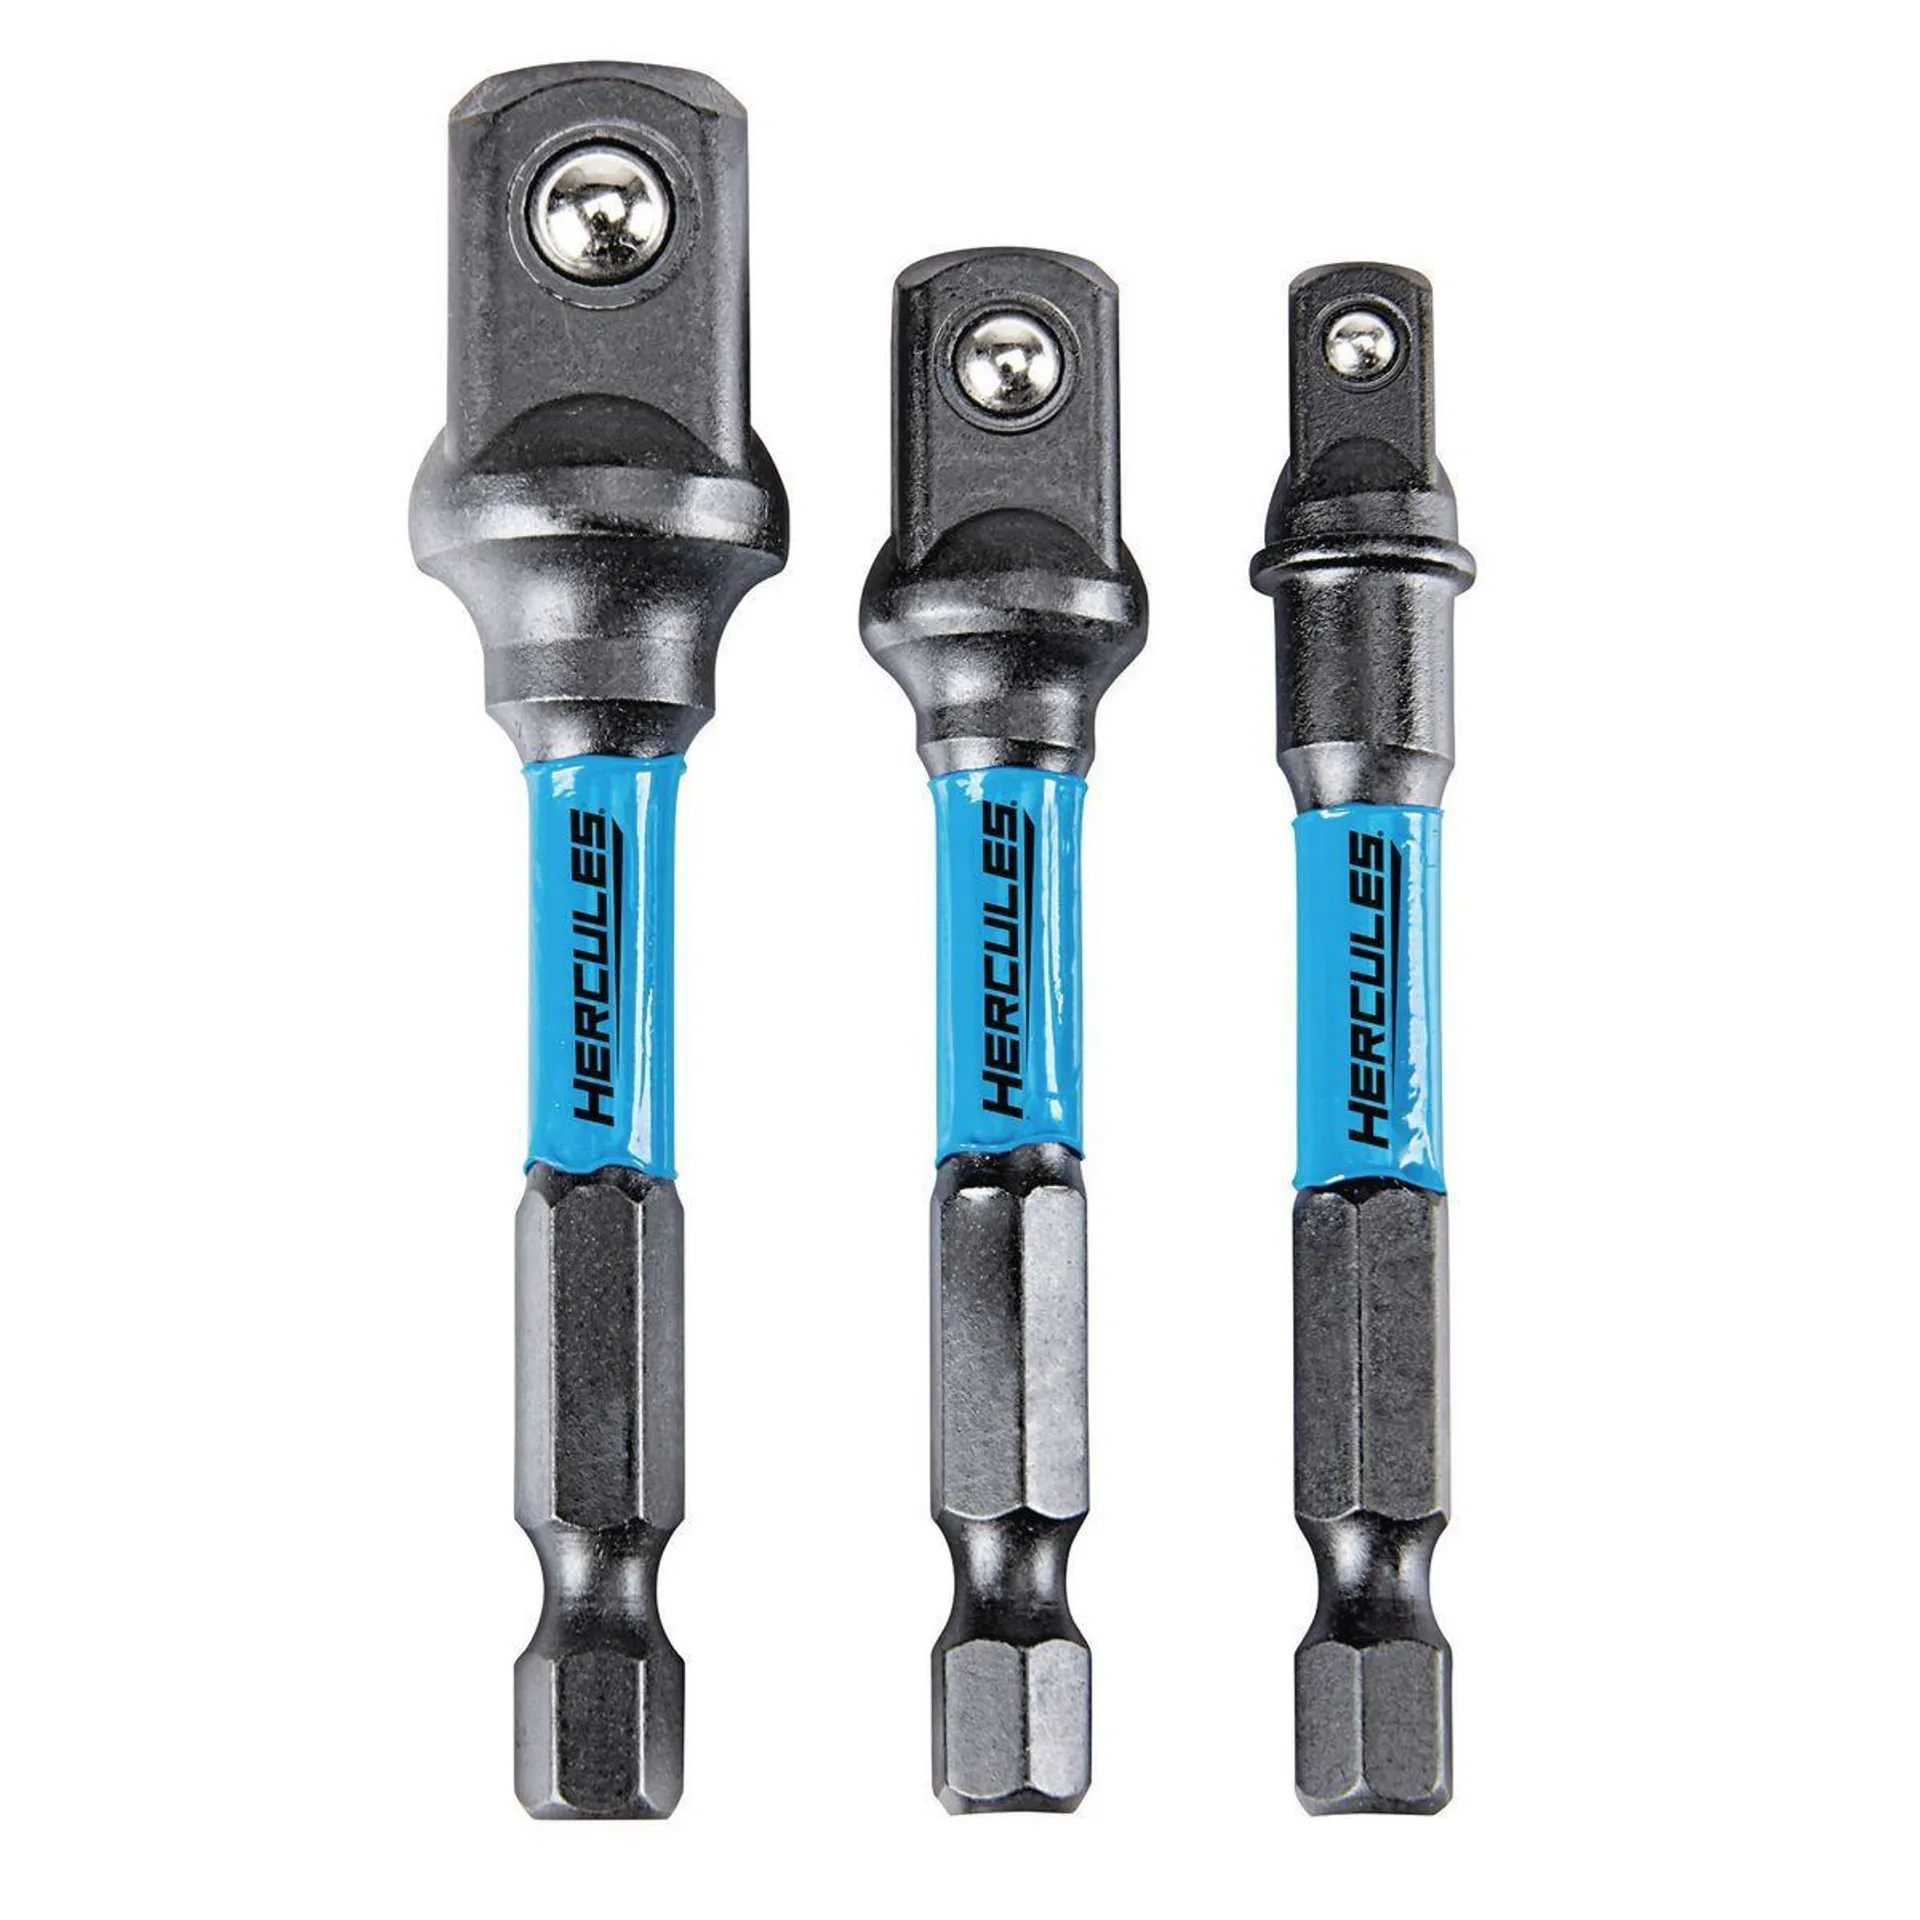 Impact Rated Hex Shank Socket Driver Set, 3-Piece